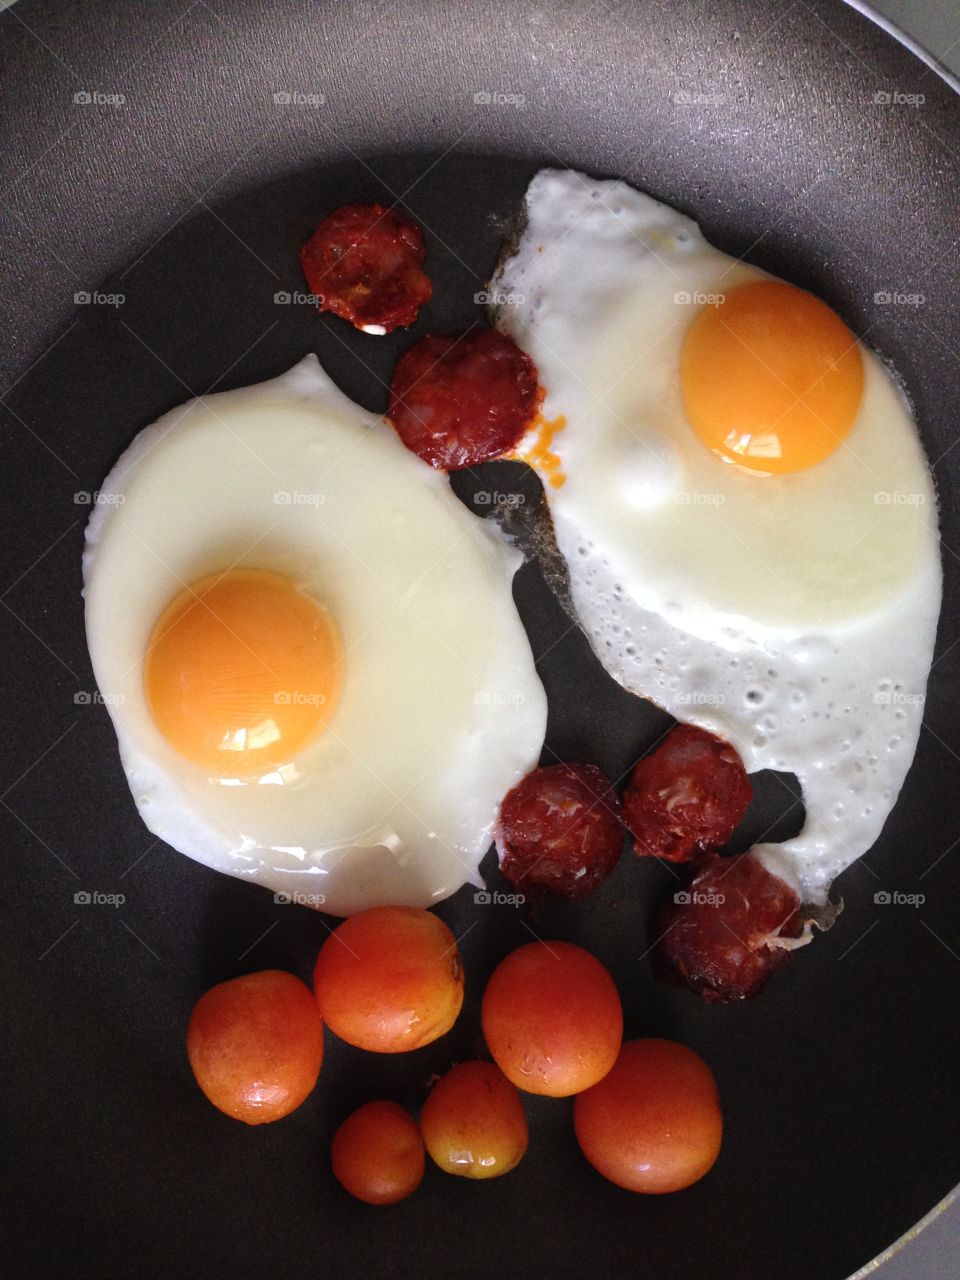 Breakfast: eggs, sausages and tomates! Enjoy the meal!